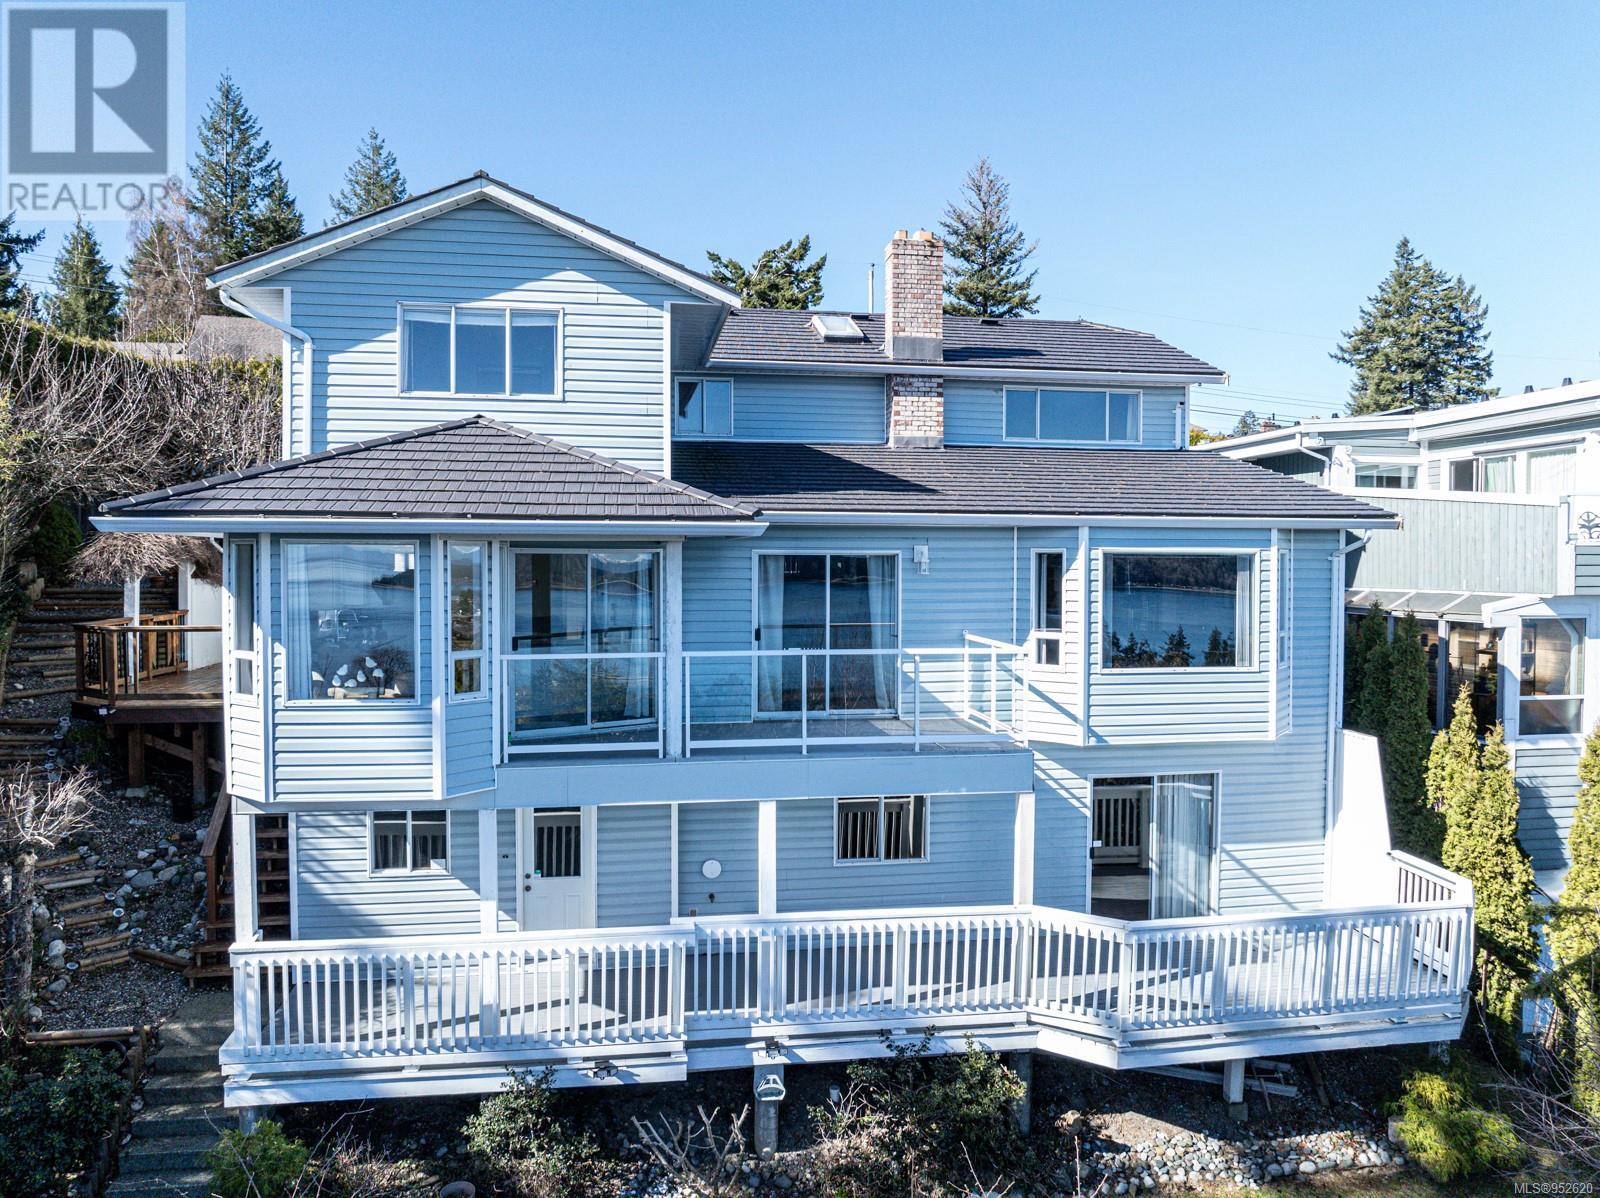 329 McLean St S, campbell river, British Columbia